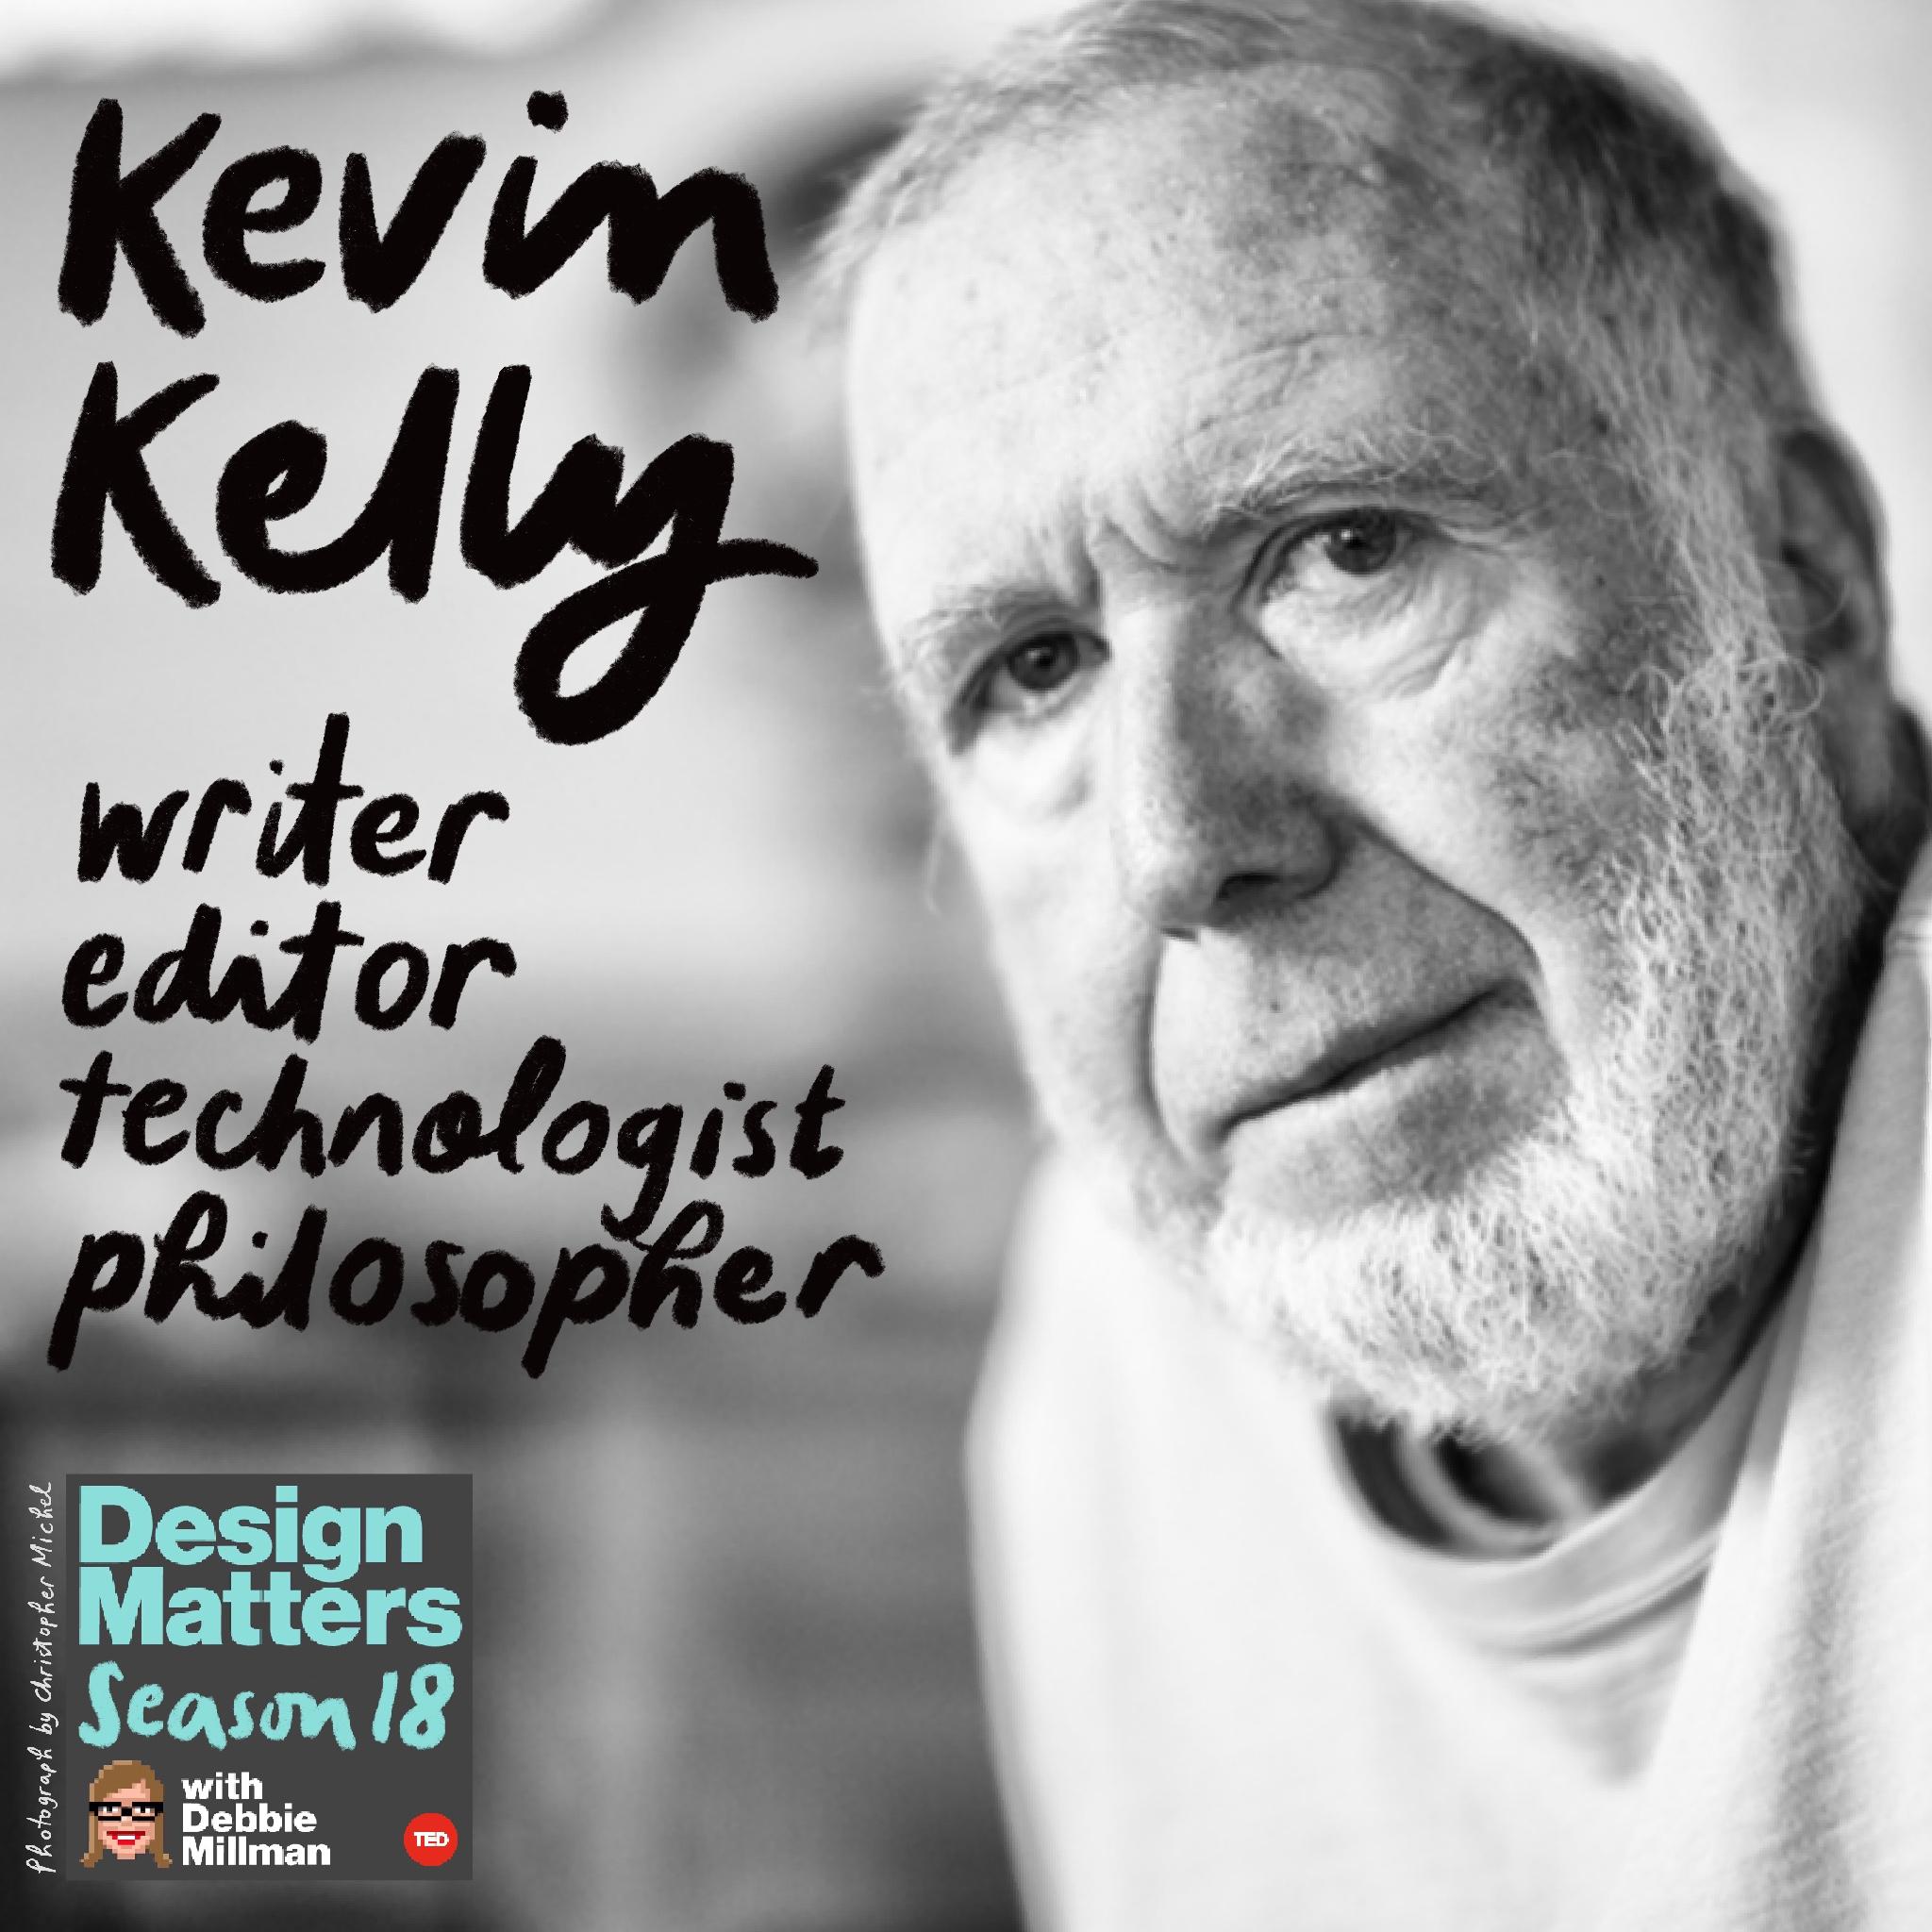 Thumbnail for "Best of Design Matters: Kevin Kelly".